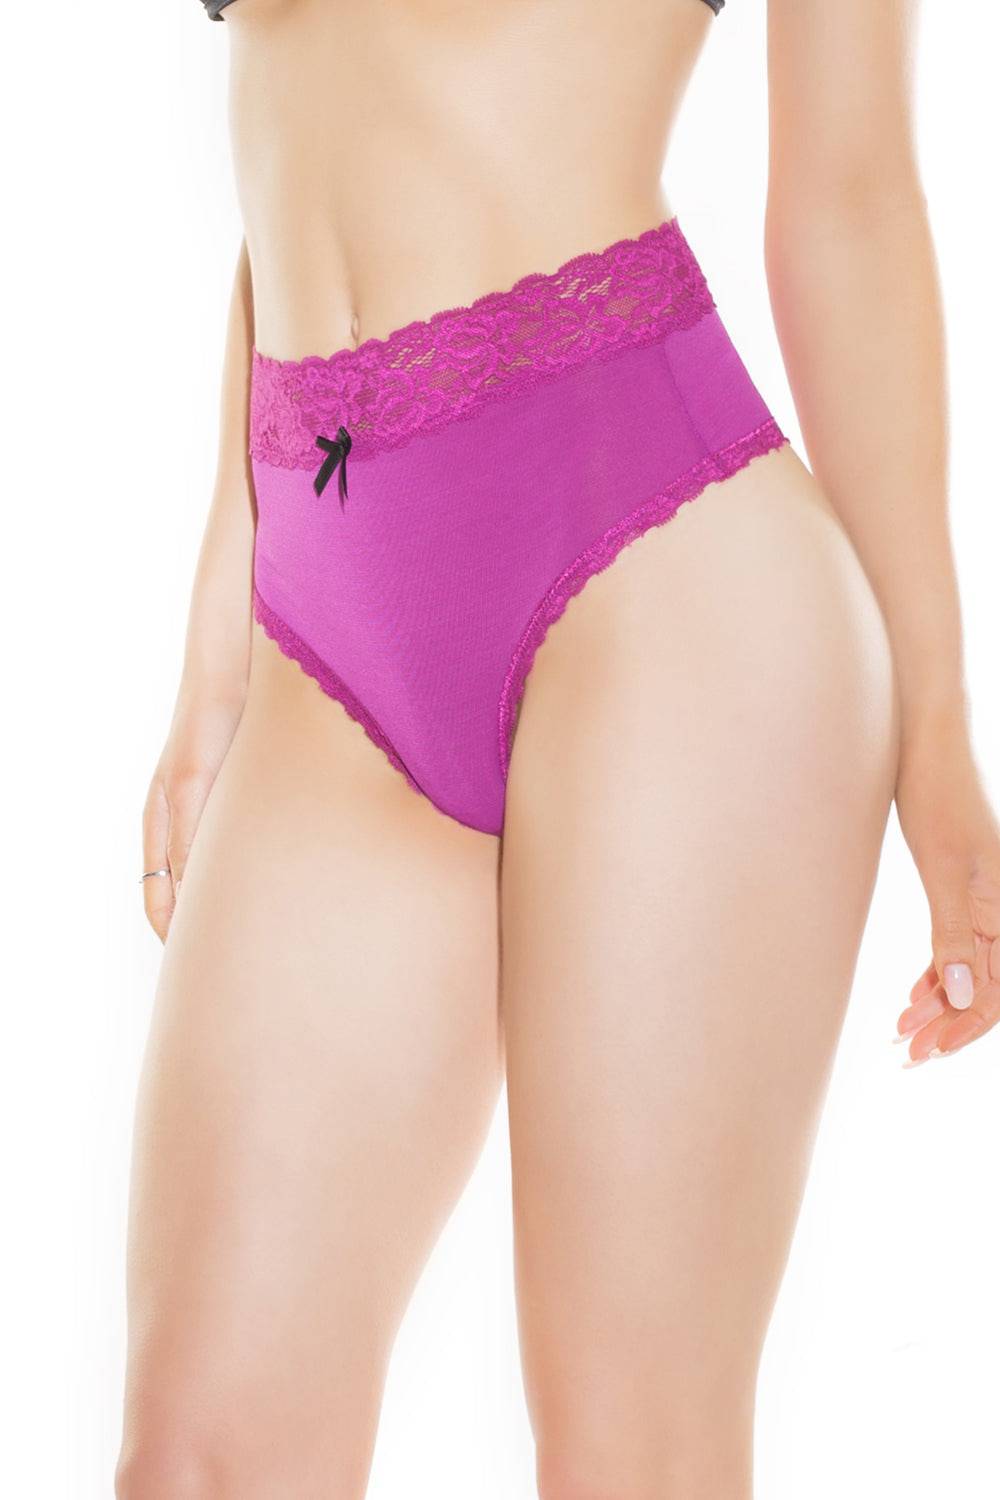 Coquette - 4097 - High Waisted Thong - Magenta - Stag Shop